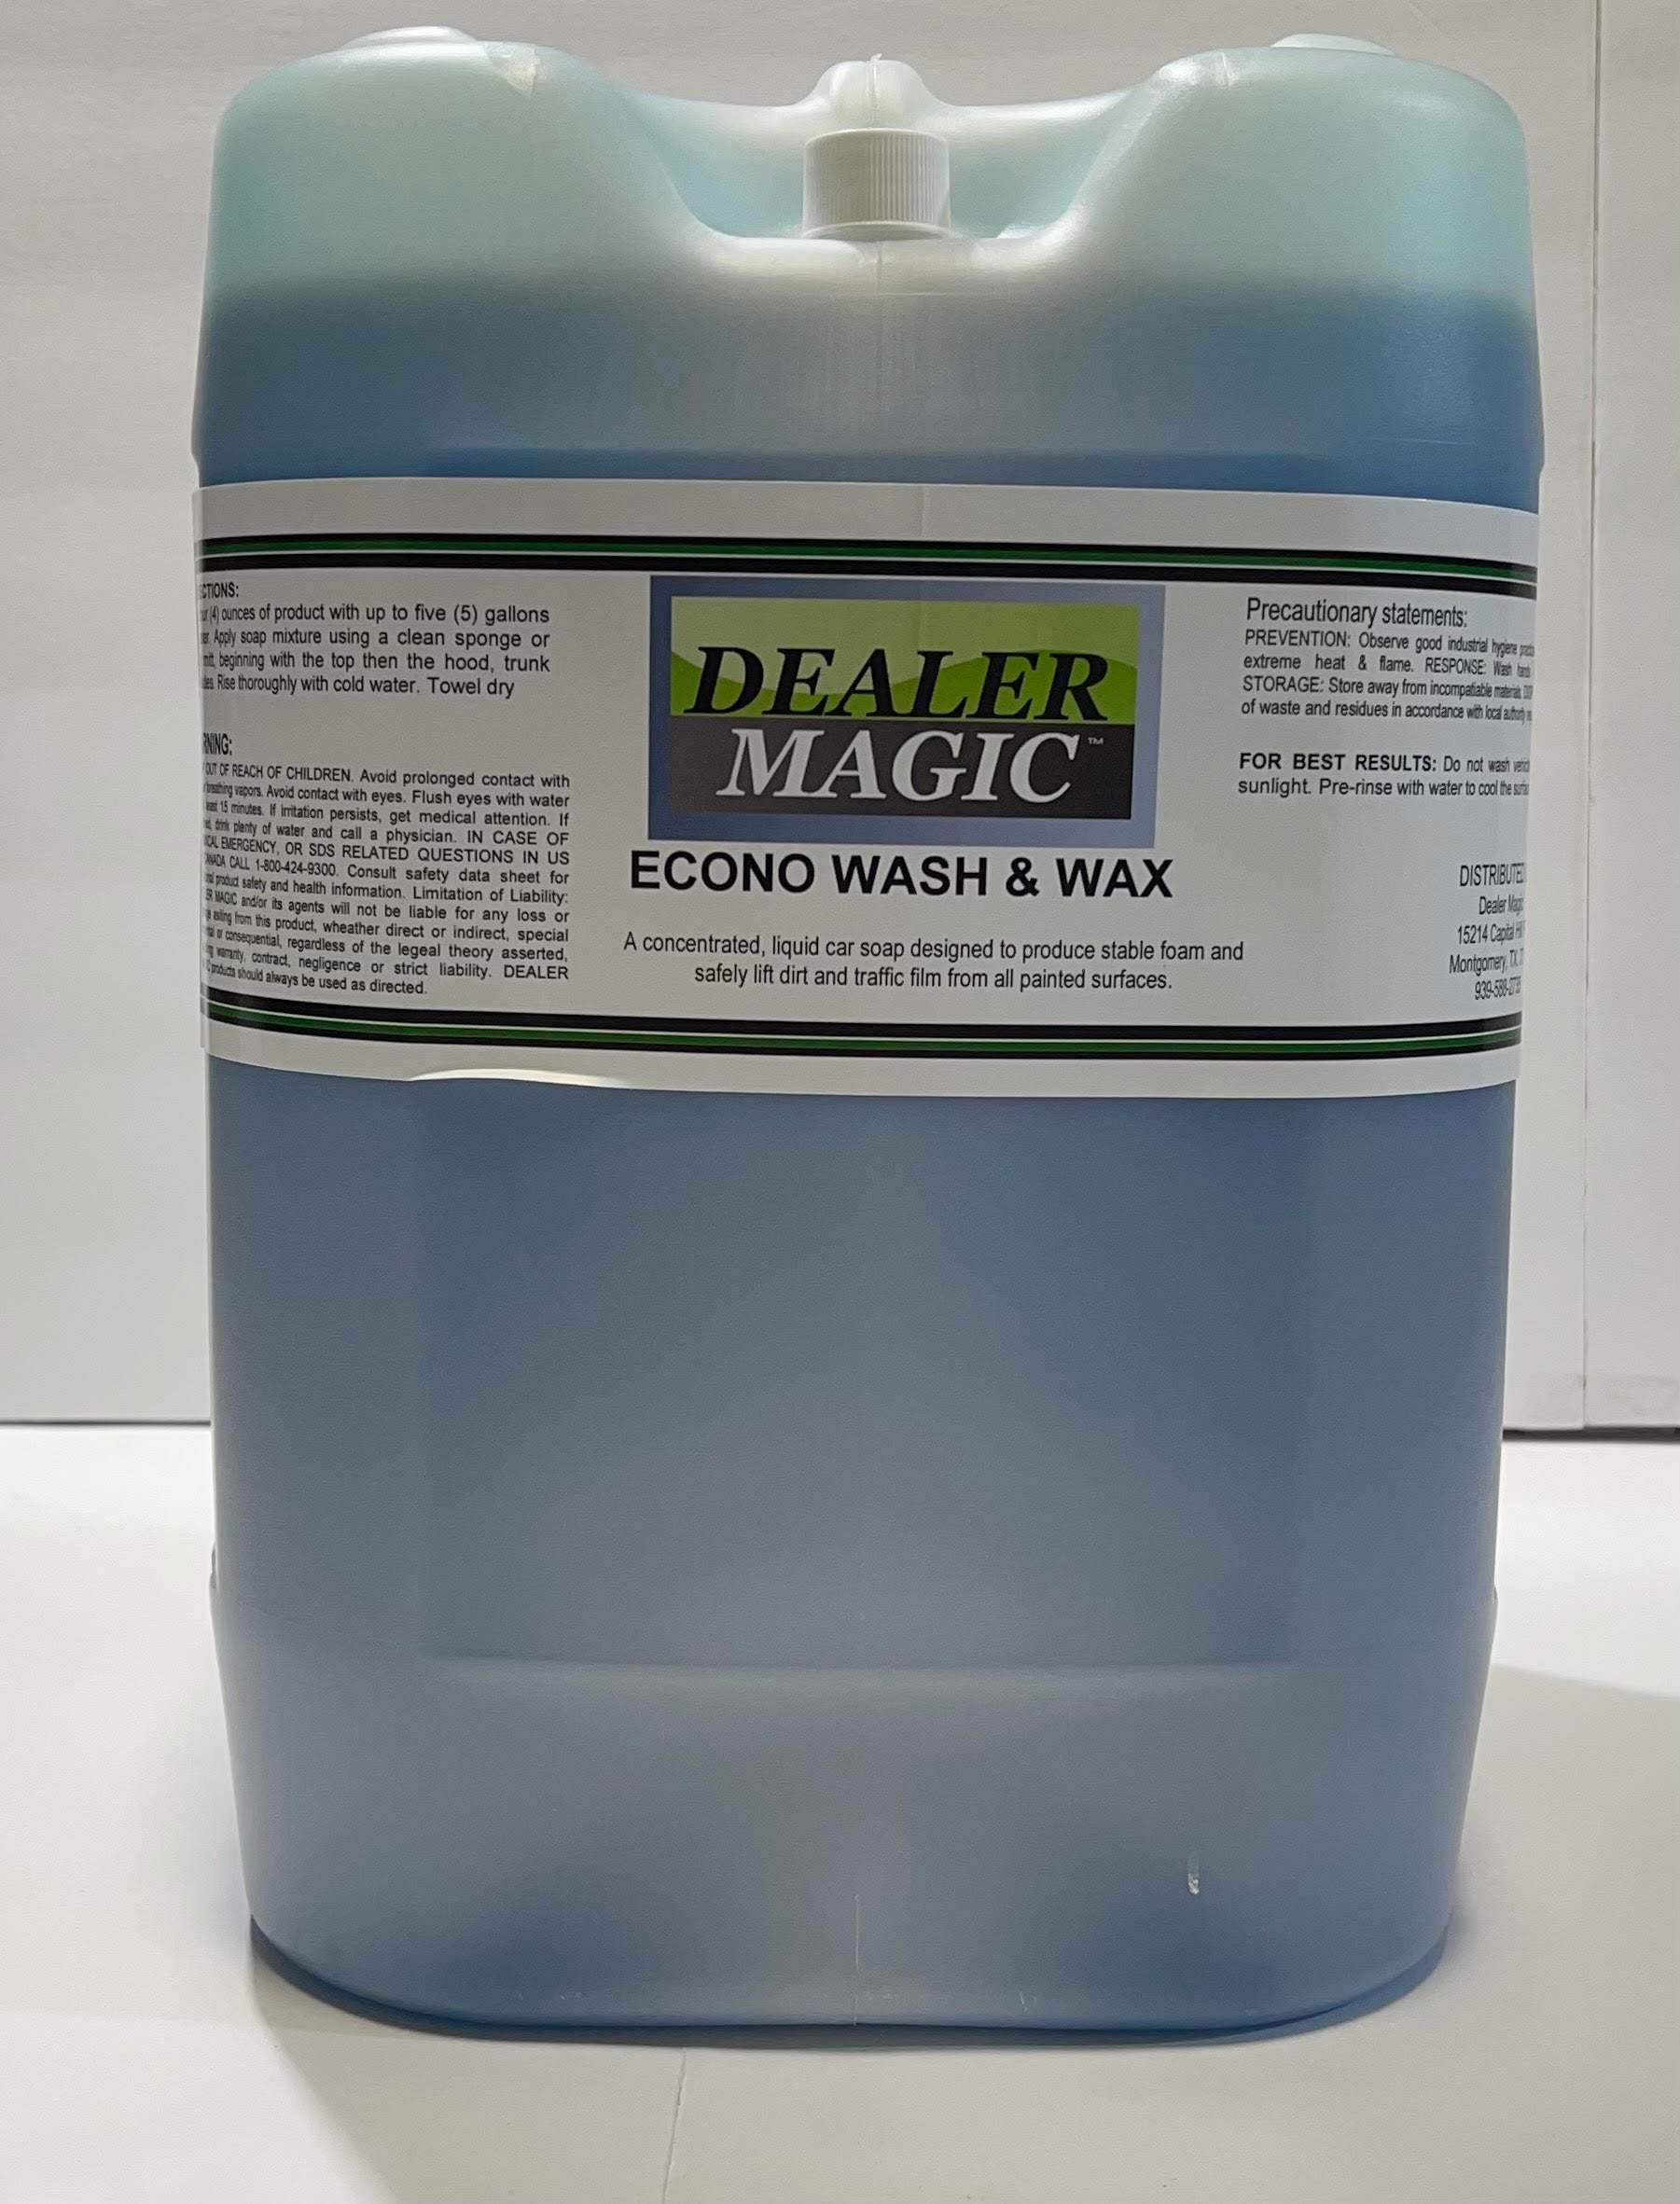 TOP 15 CAR-DETAILING PRODUCTS - Best Of Top